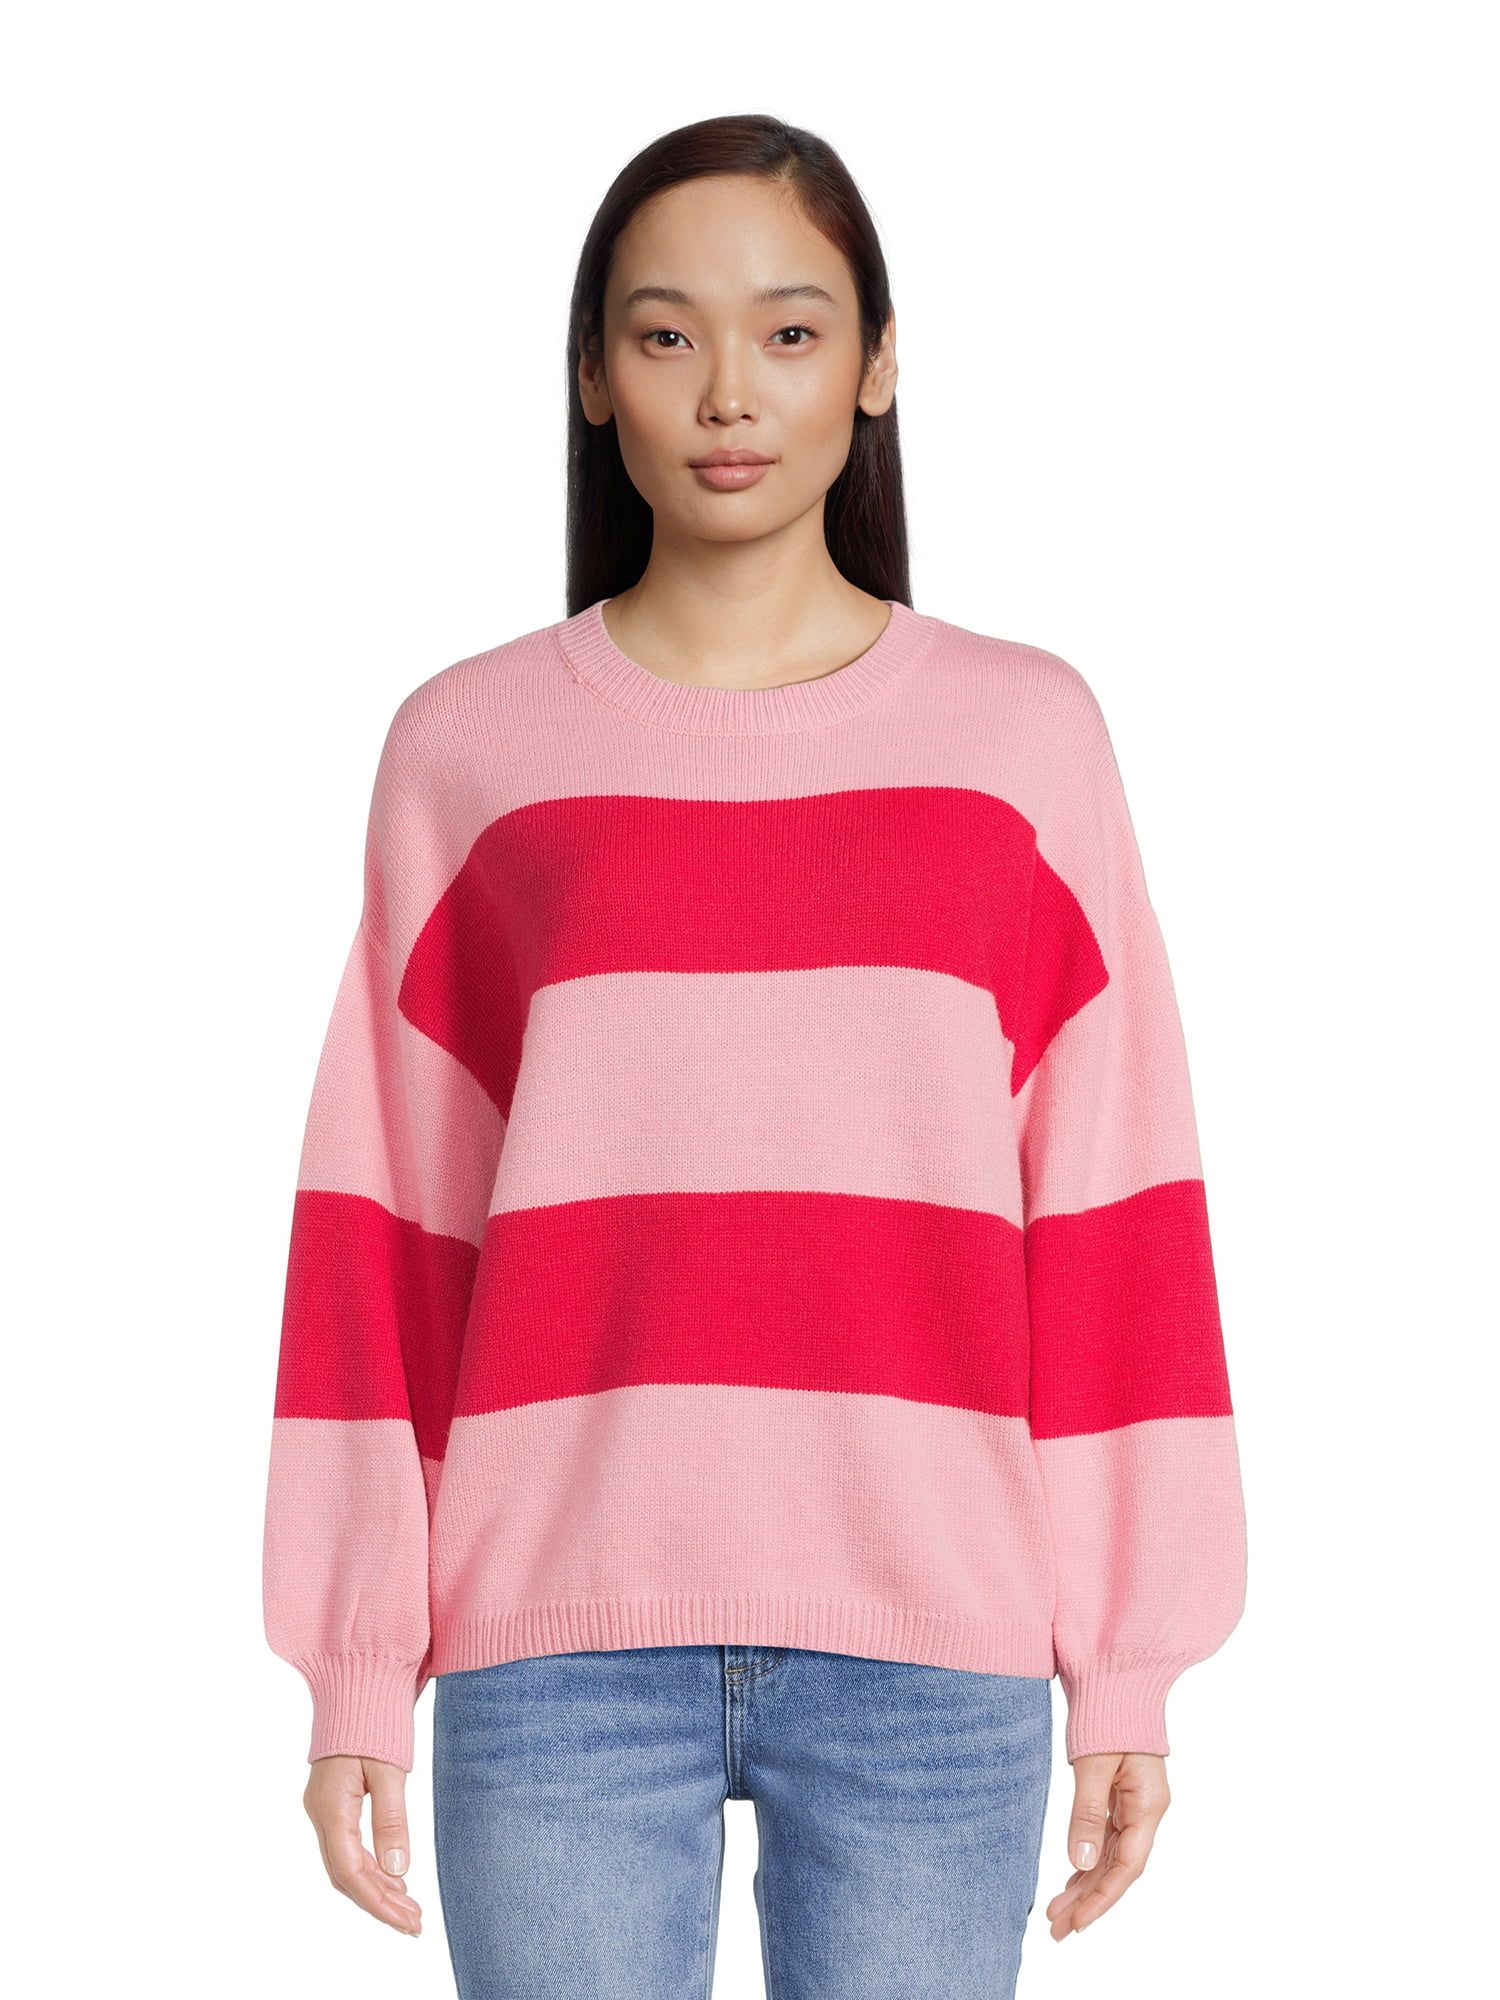 Dreamers By Debut Women's Striped Sweater with Long Puff Sleeves, Mid-Weight | Walmart (US)